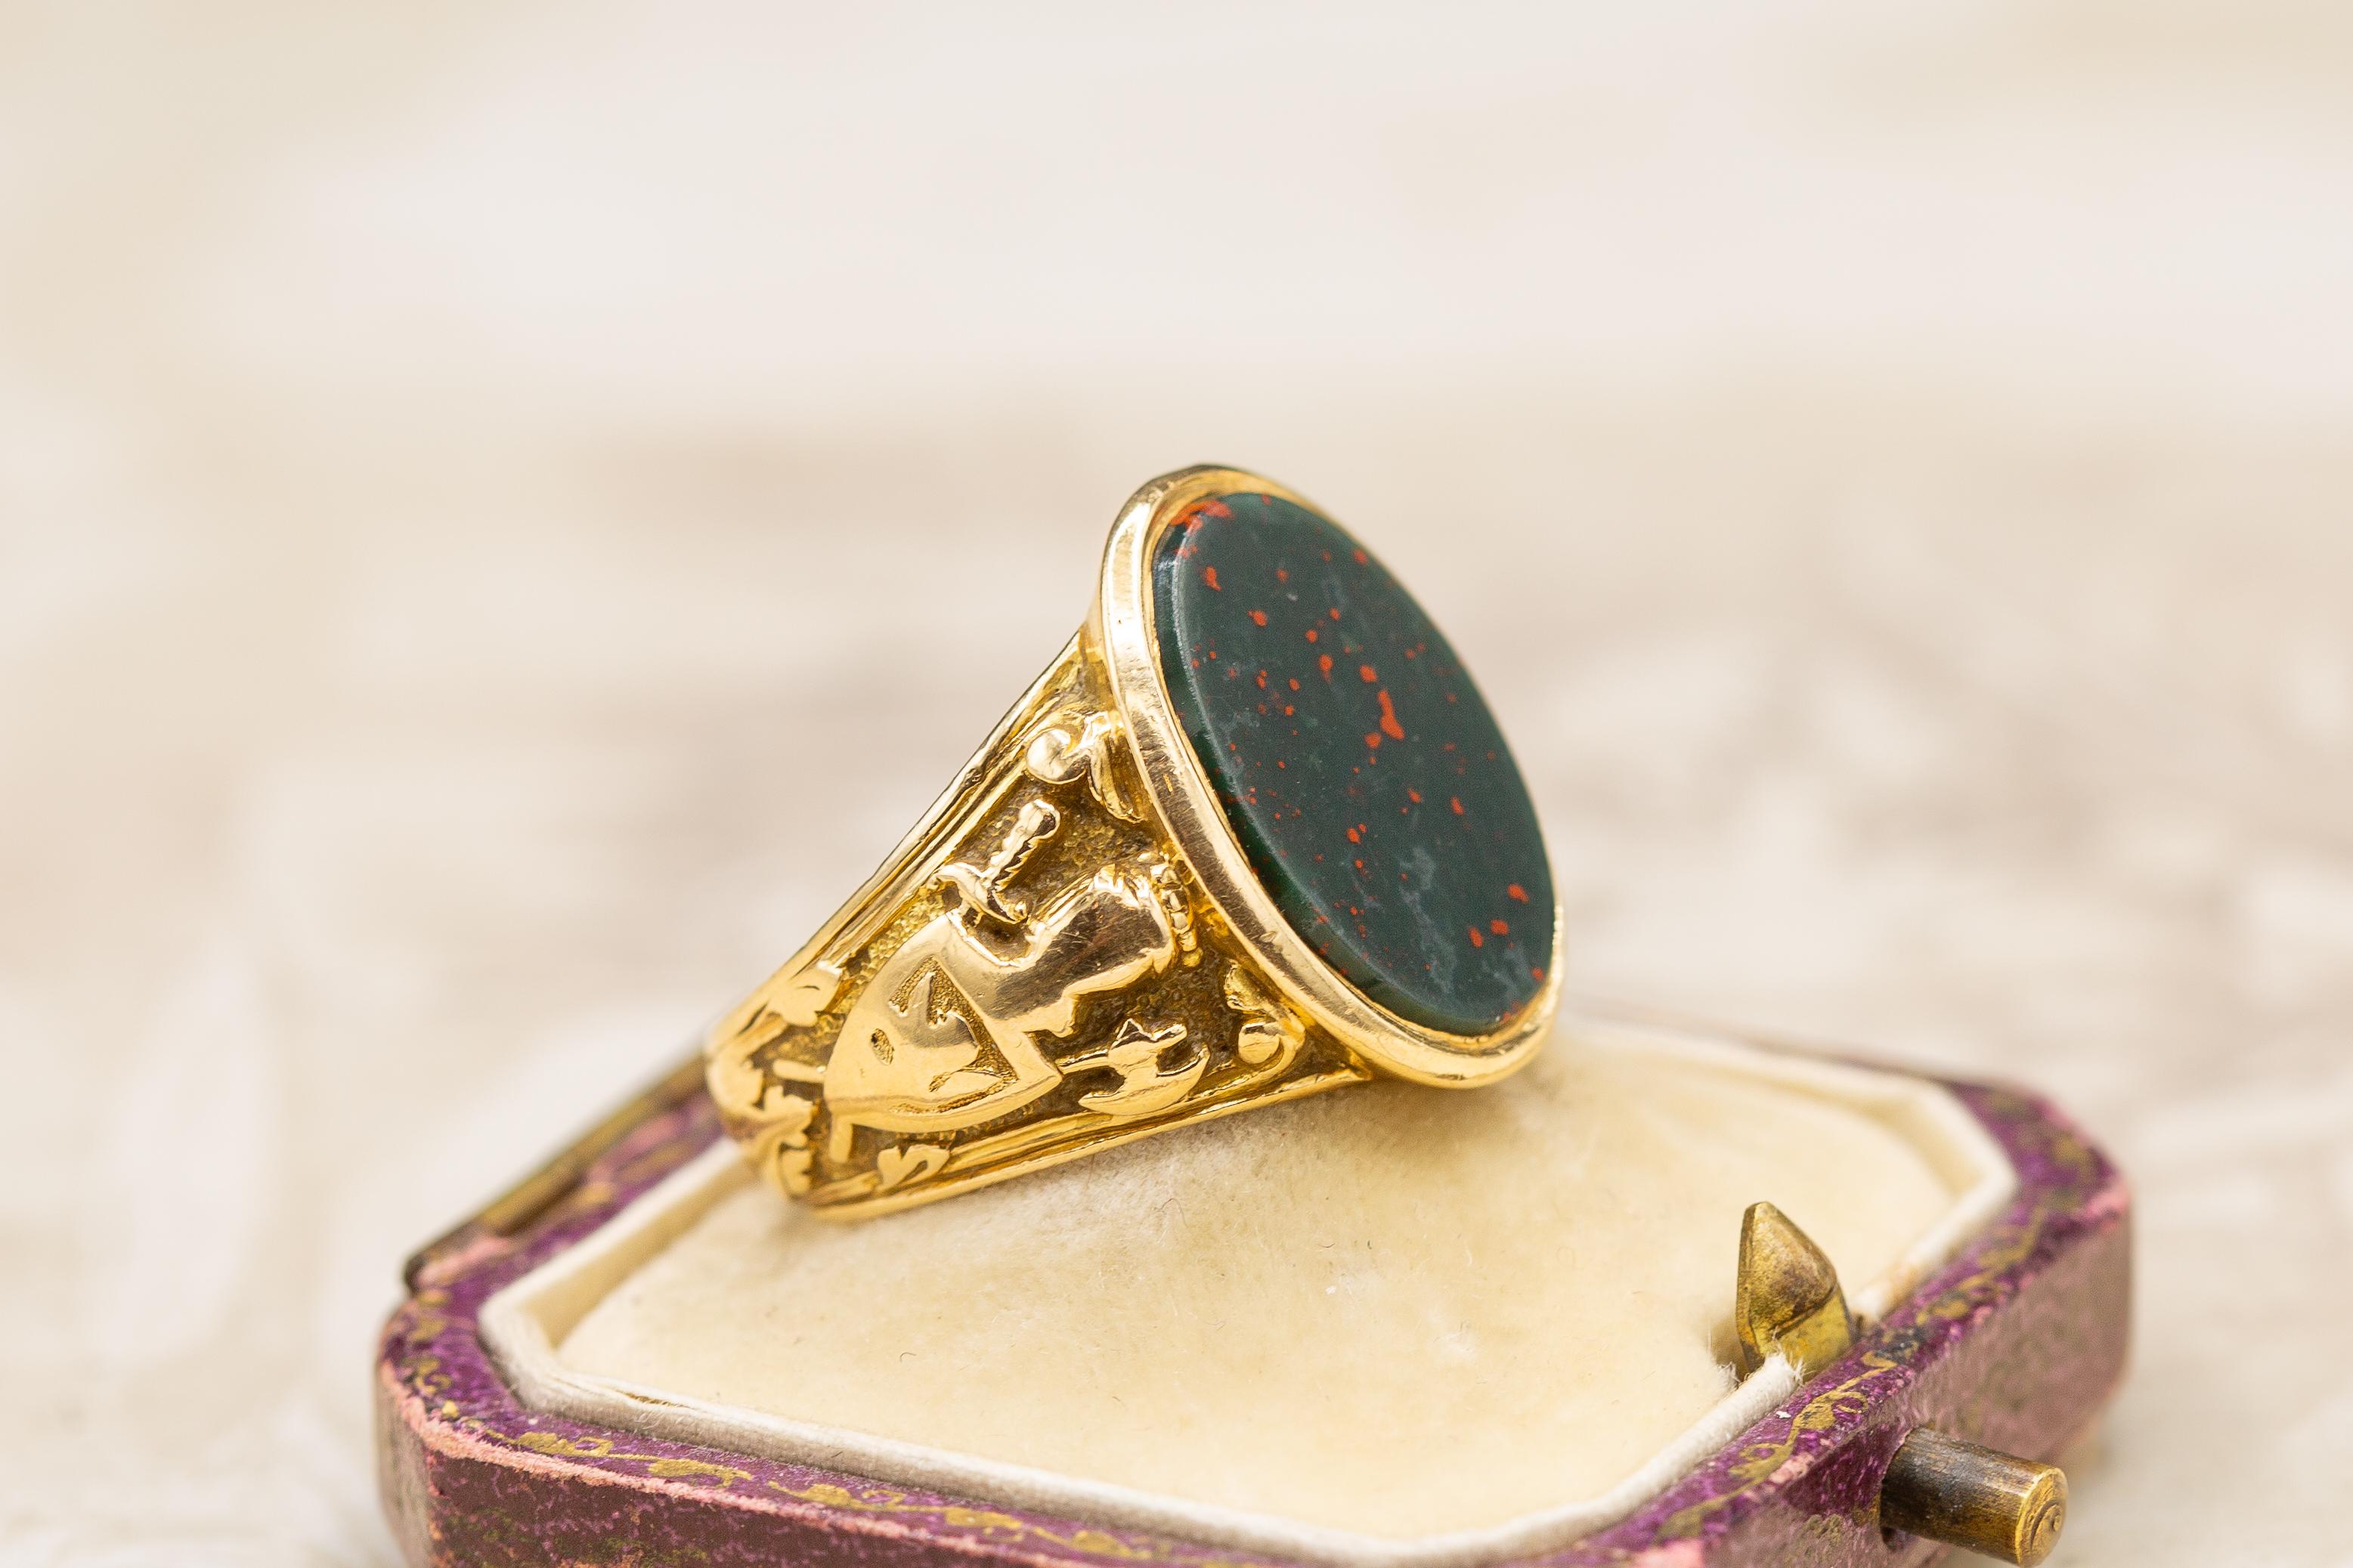 Antique Victorian Heavy 18K Gold Bloodstone Signet Ring Mens Coat of Arms c.1890 For Sale 7